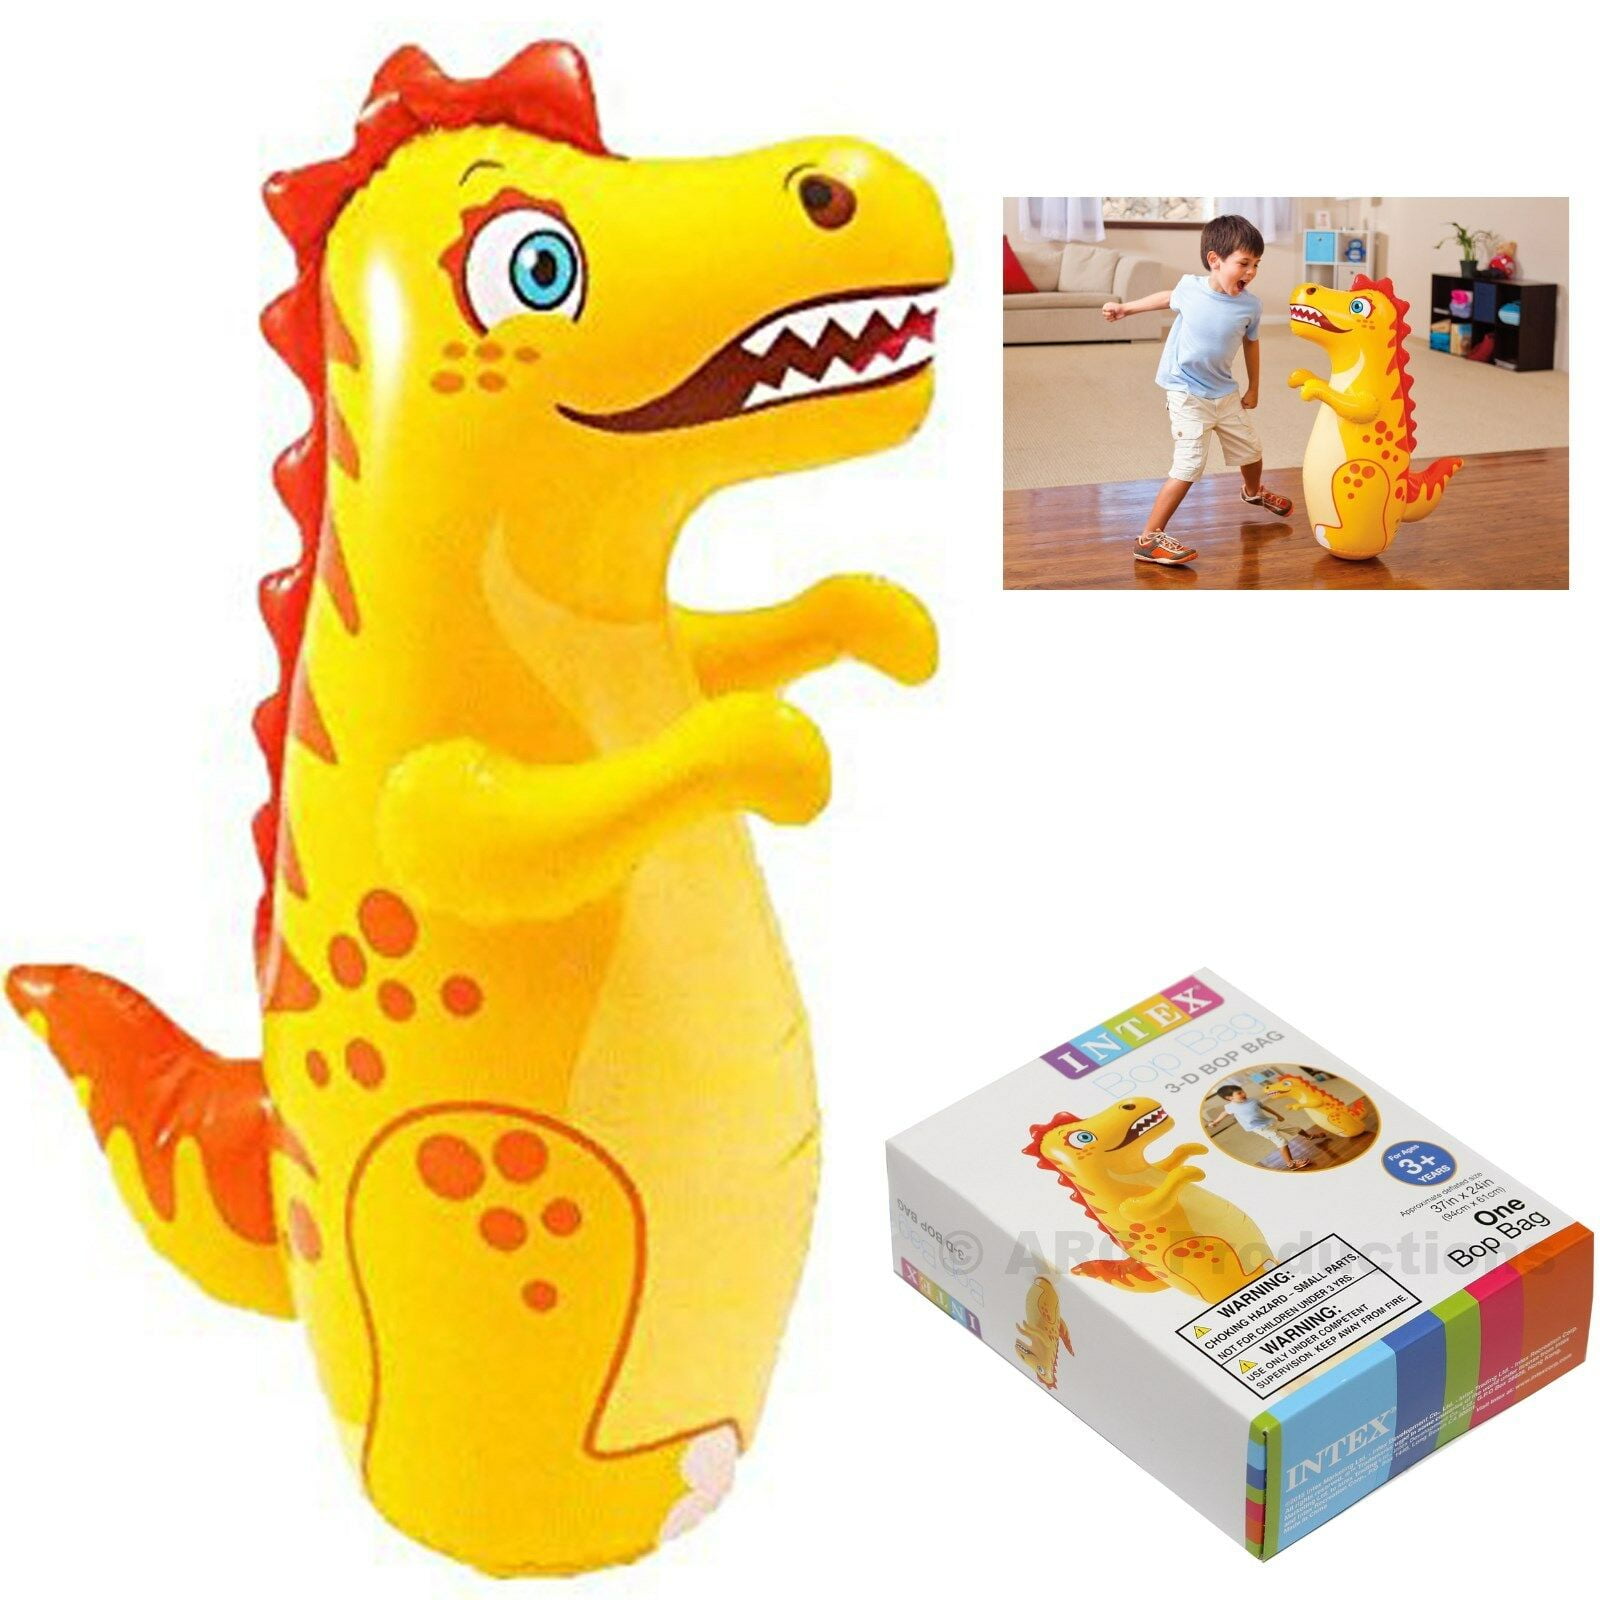 3D Bop Bag SEA HORSE Inflatable Blow Up Punching Bag Toy Gift Kids Fun 